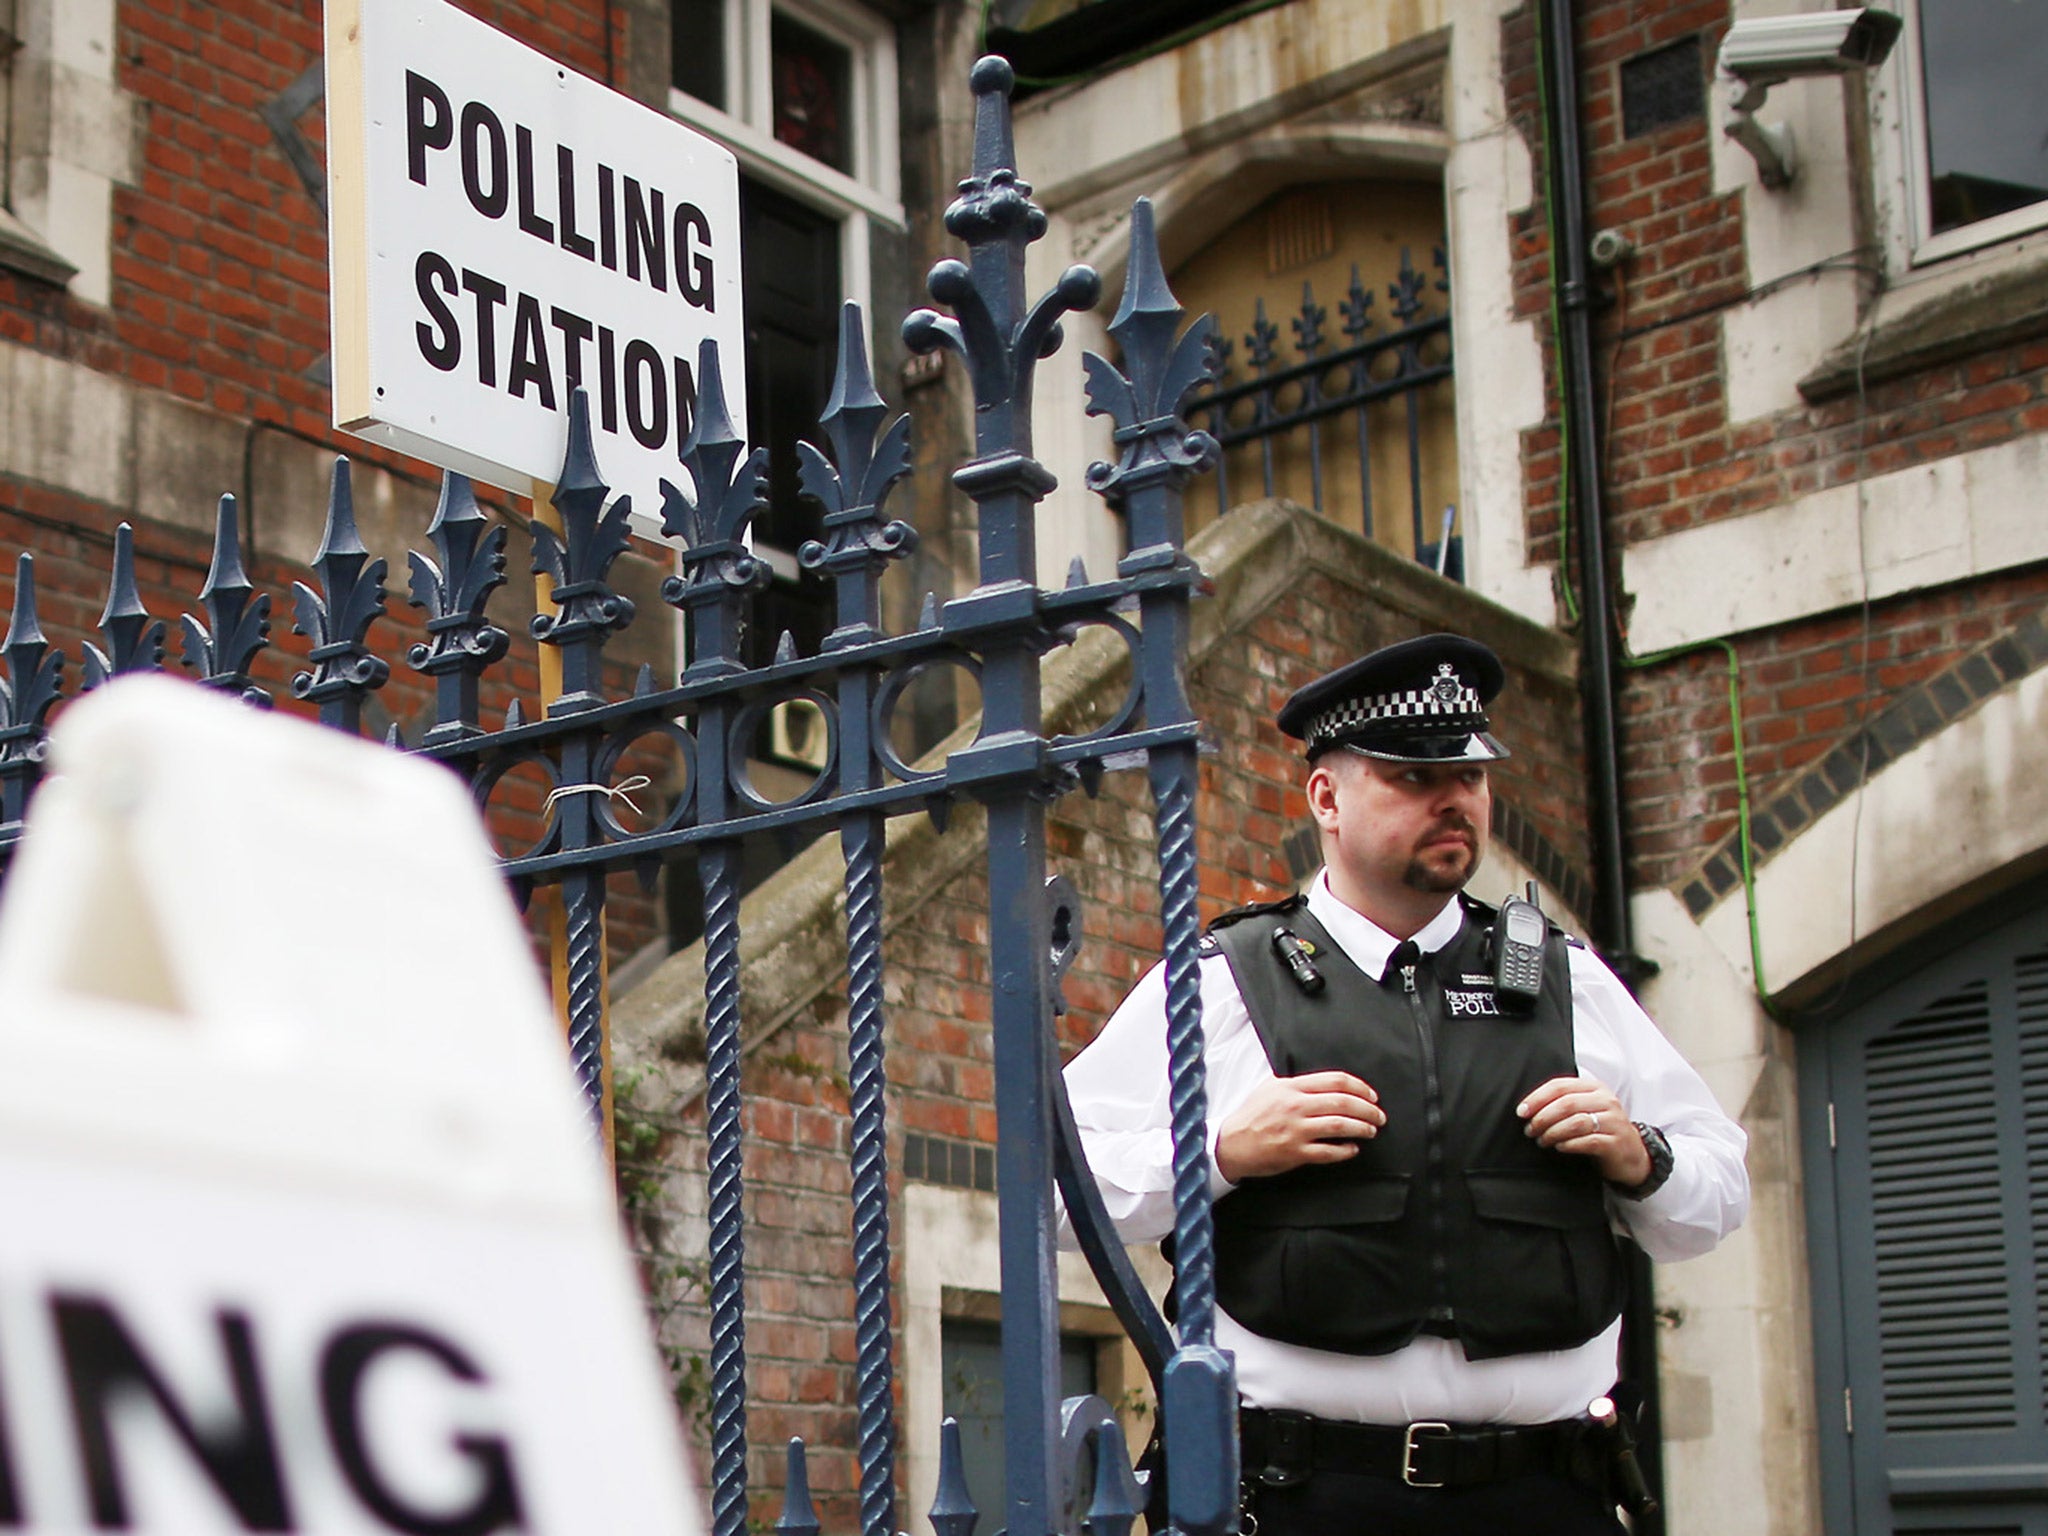 A police officer outside a polling station in Tower Hamlets during last May’s local elections following accusations of voter intimidation in the area